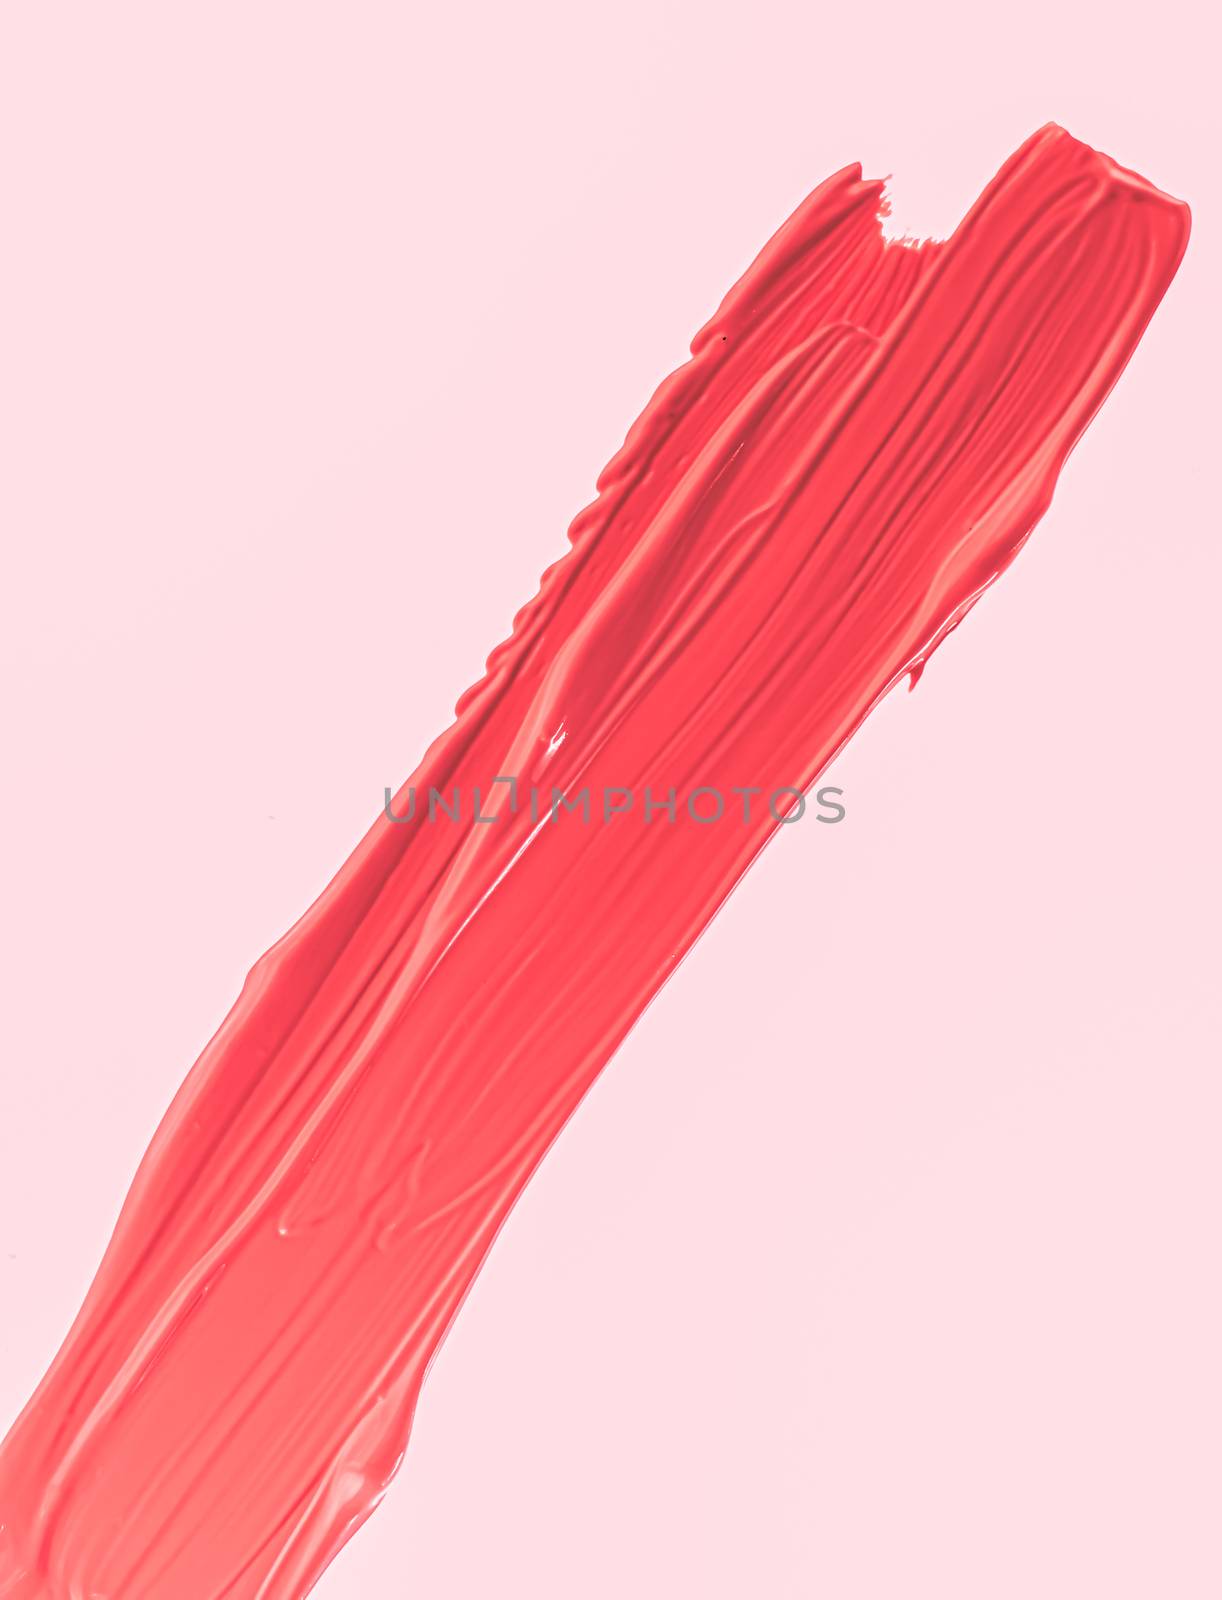 Red brush stroke or makeup smudge closeup, beauty cosmetics and  by Anneleven